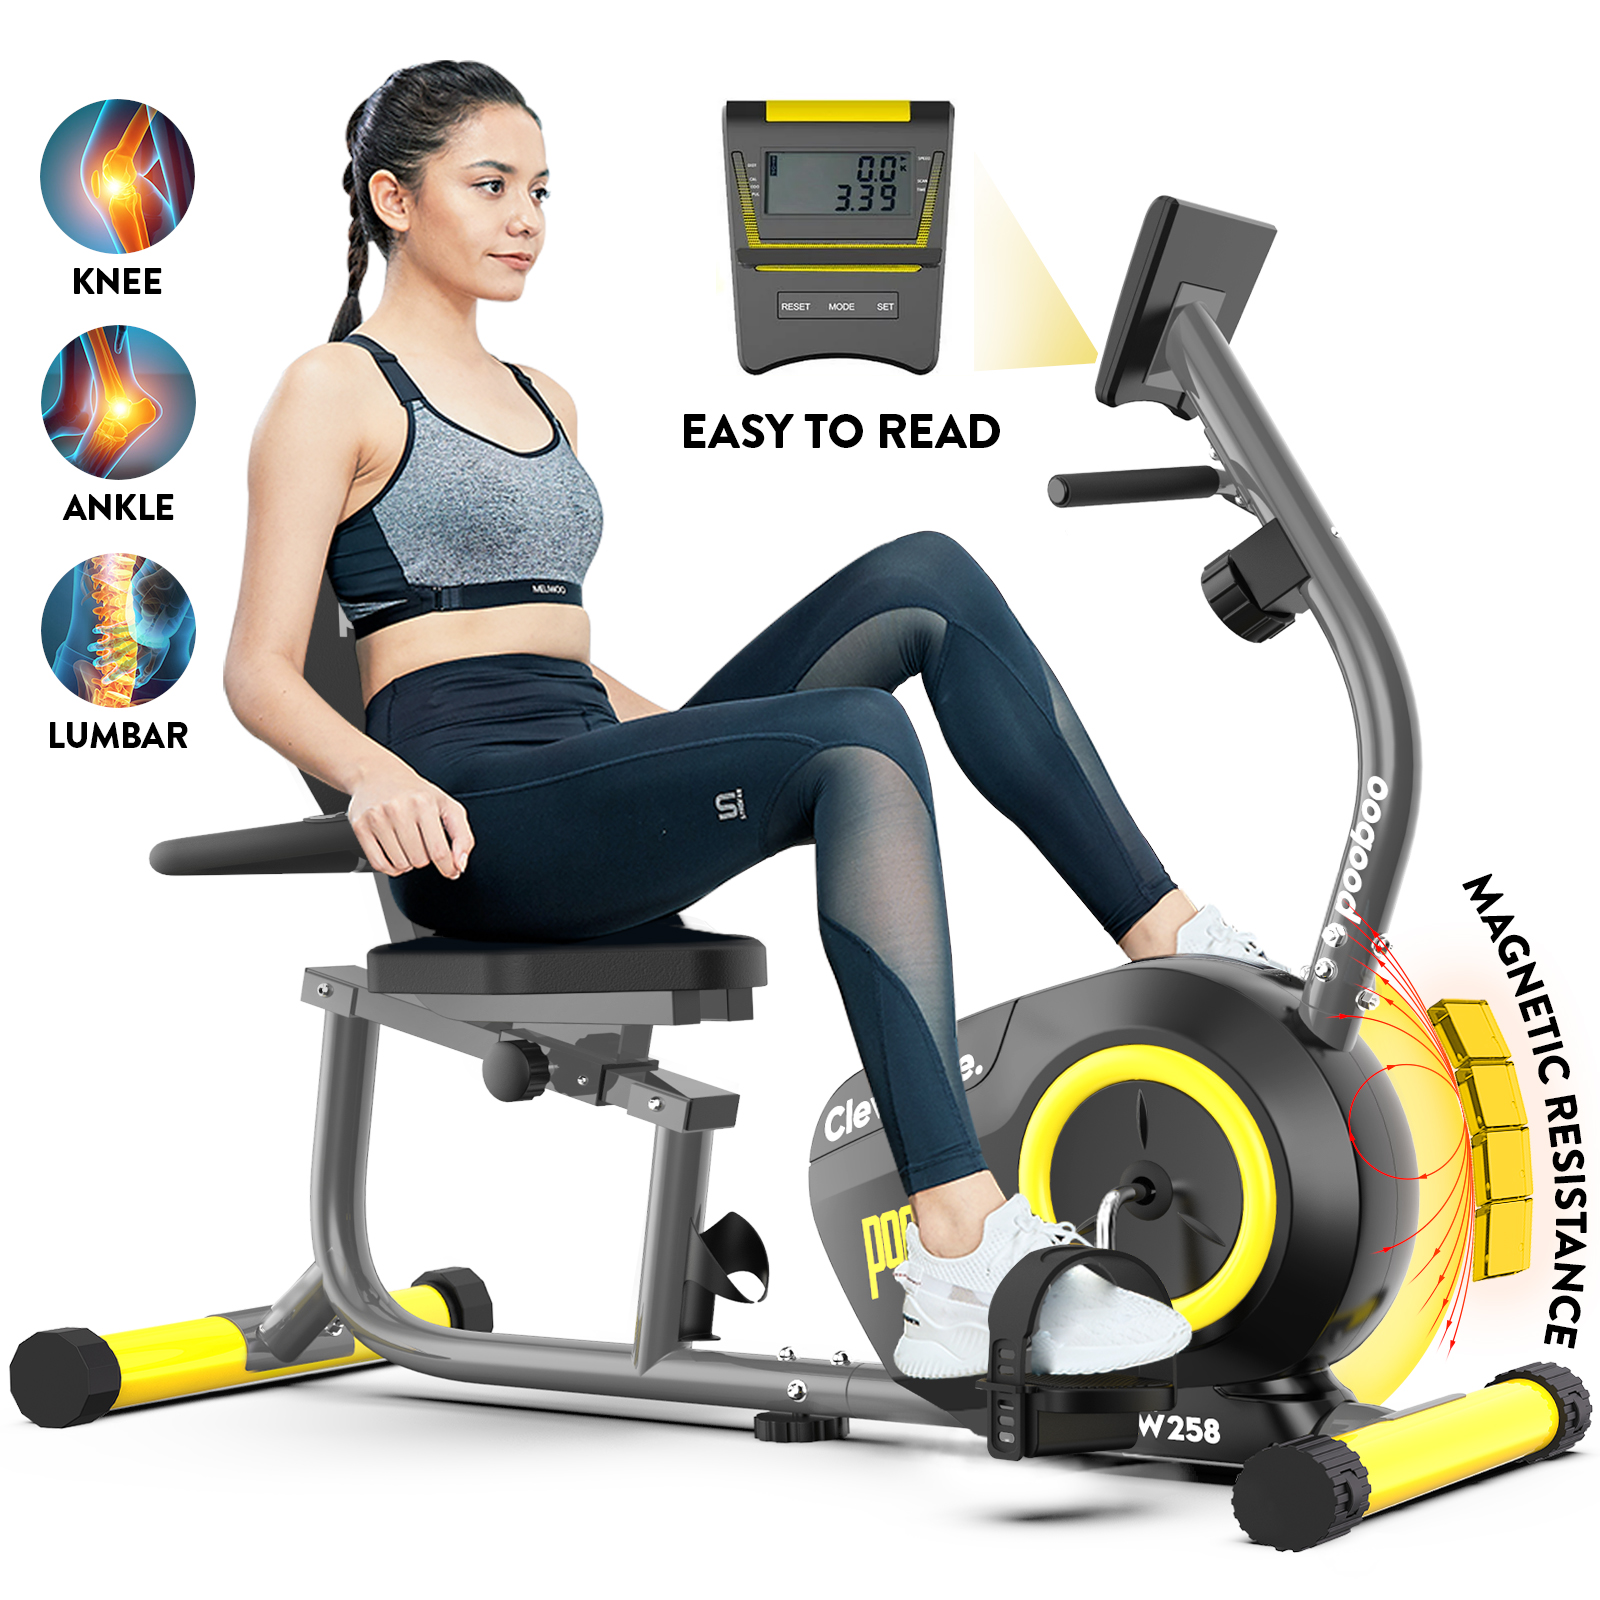 Pooboo Recumbent Exercise Bike Stationary Belt Drive Indoor Cycling Bikes for Home Cardio Workout Training 380lb - image 1 of 15